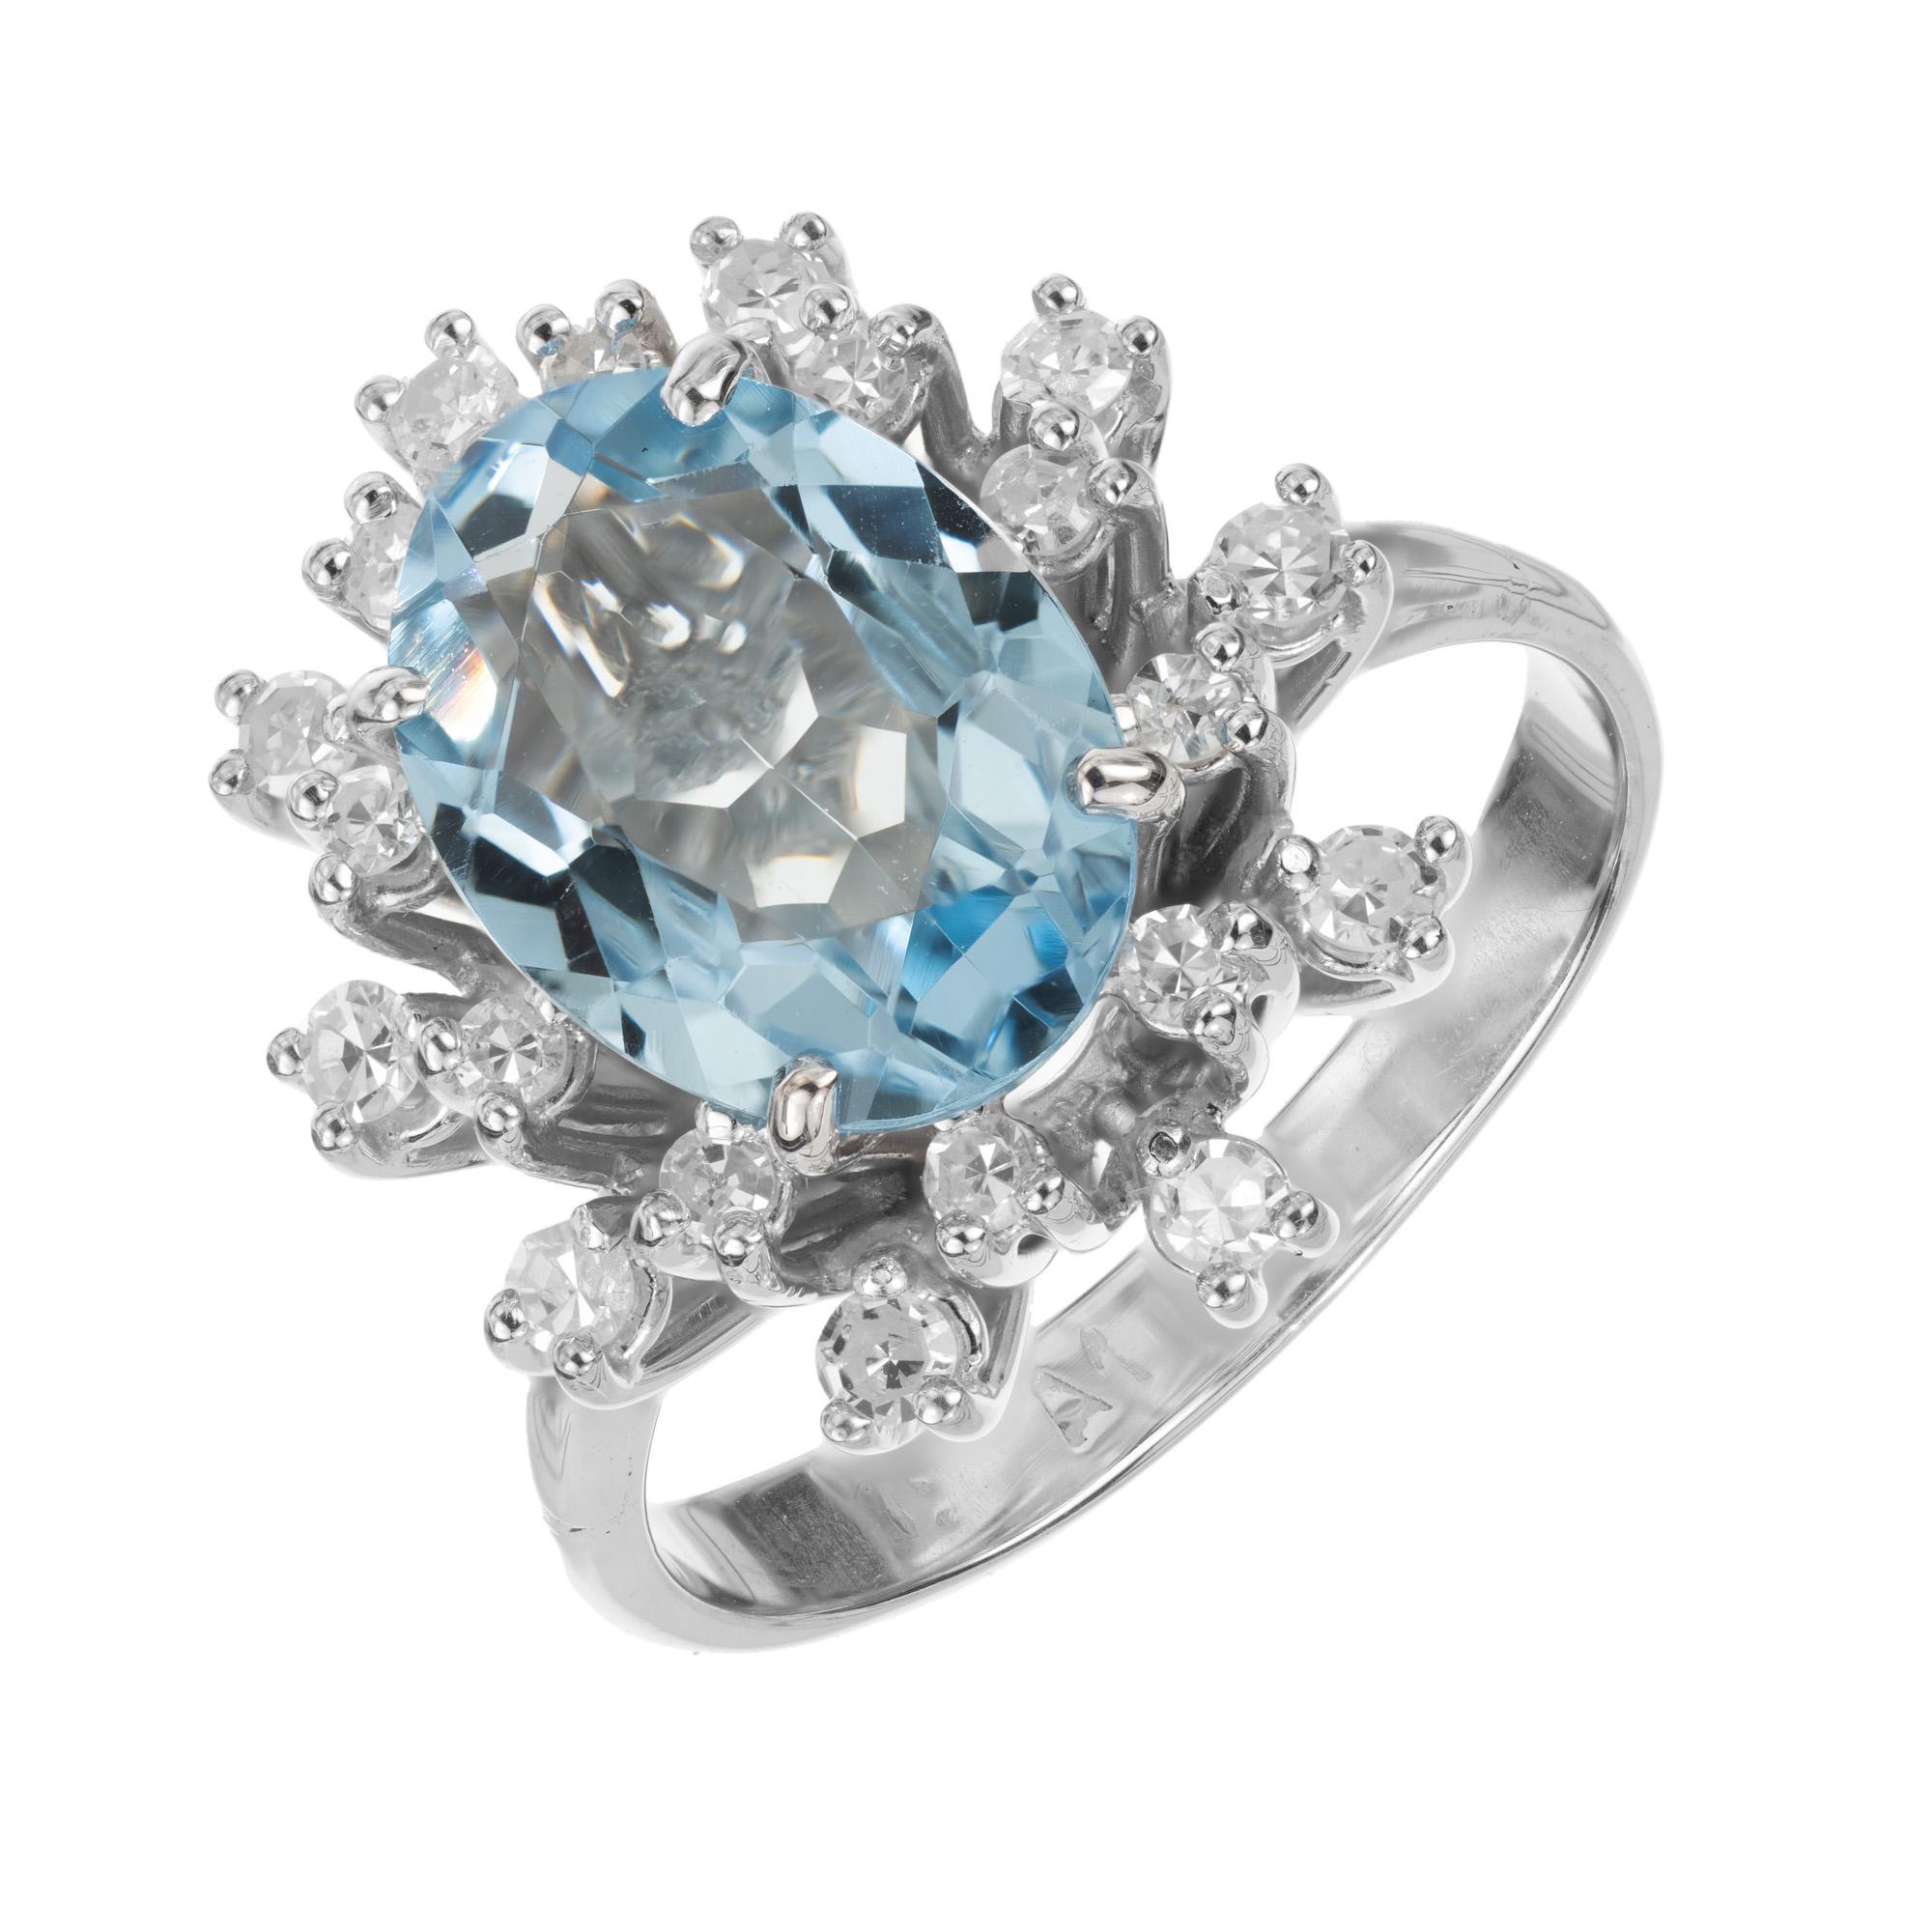 Vintage Mid 1950's Aquamarine and diamond engagement ring. This mid-century ring begins with a 1.50ct oval aquamarine, mounted in a setting crafted in 18k white gold. The aqua is surrounded 20 single cut diamonds in a double halo that adds a touch